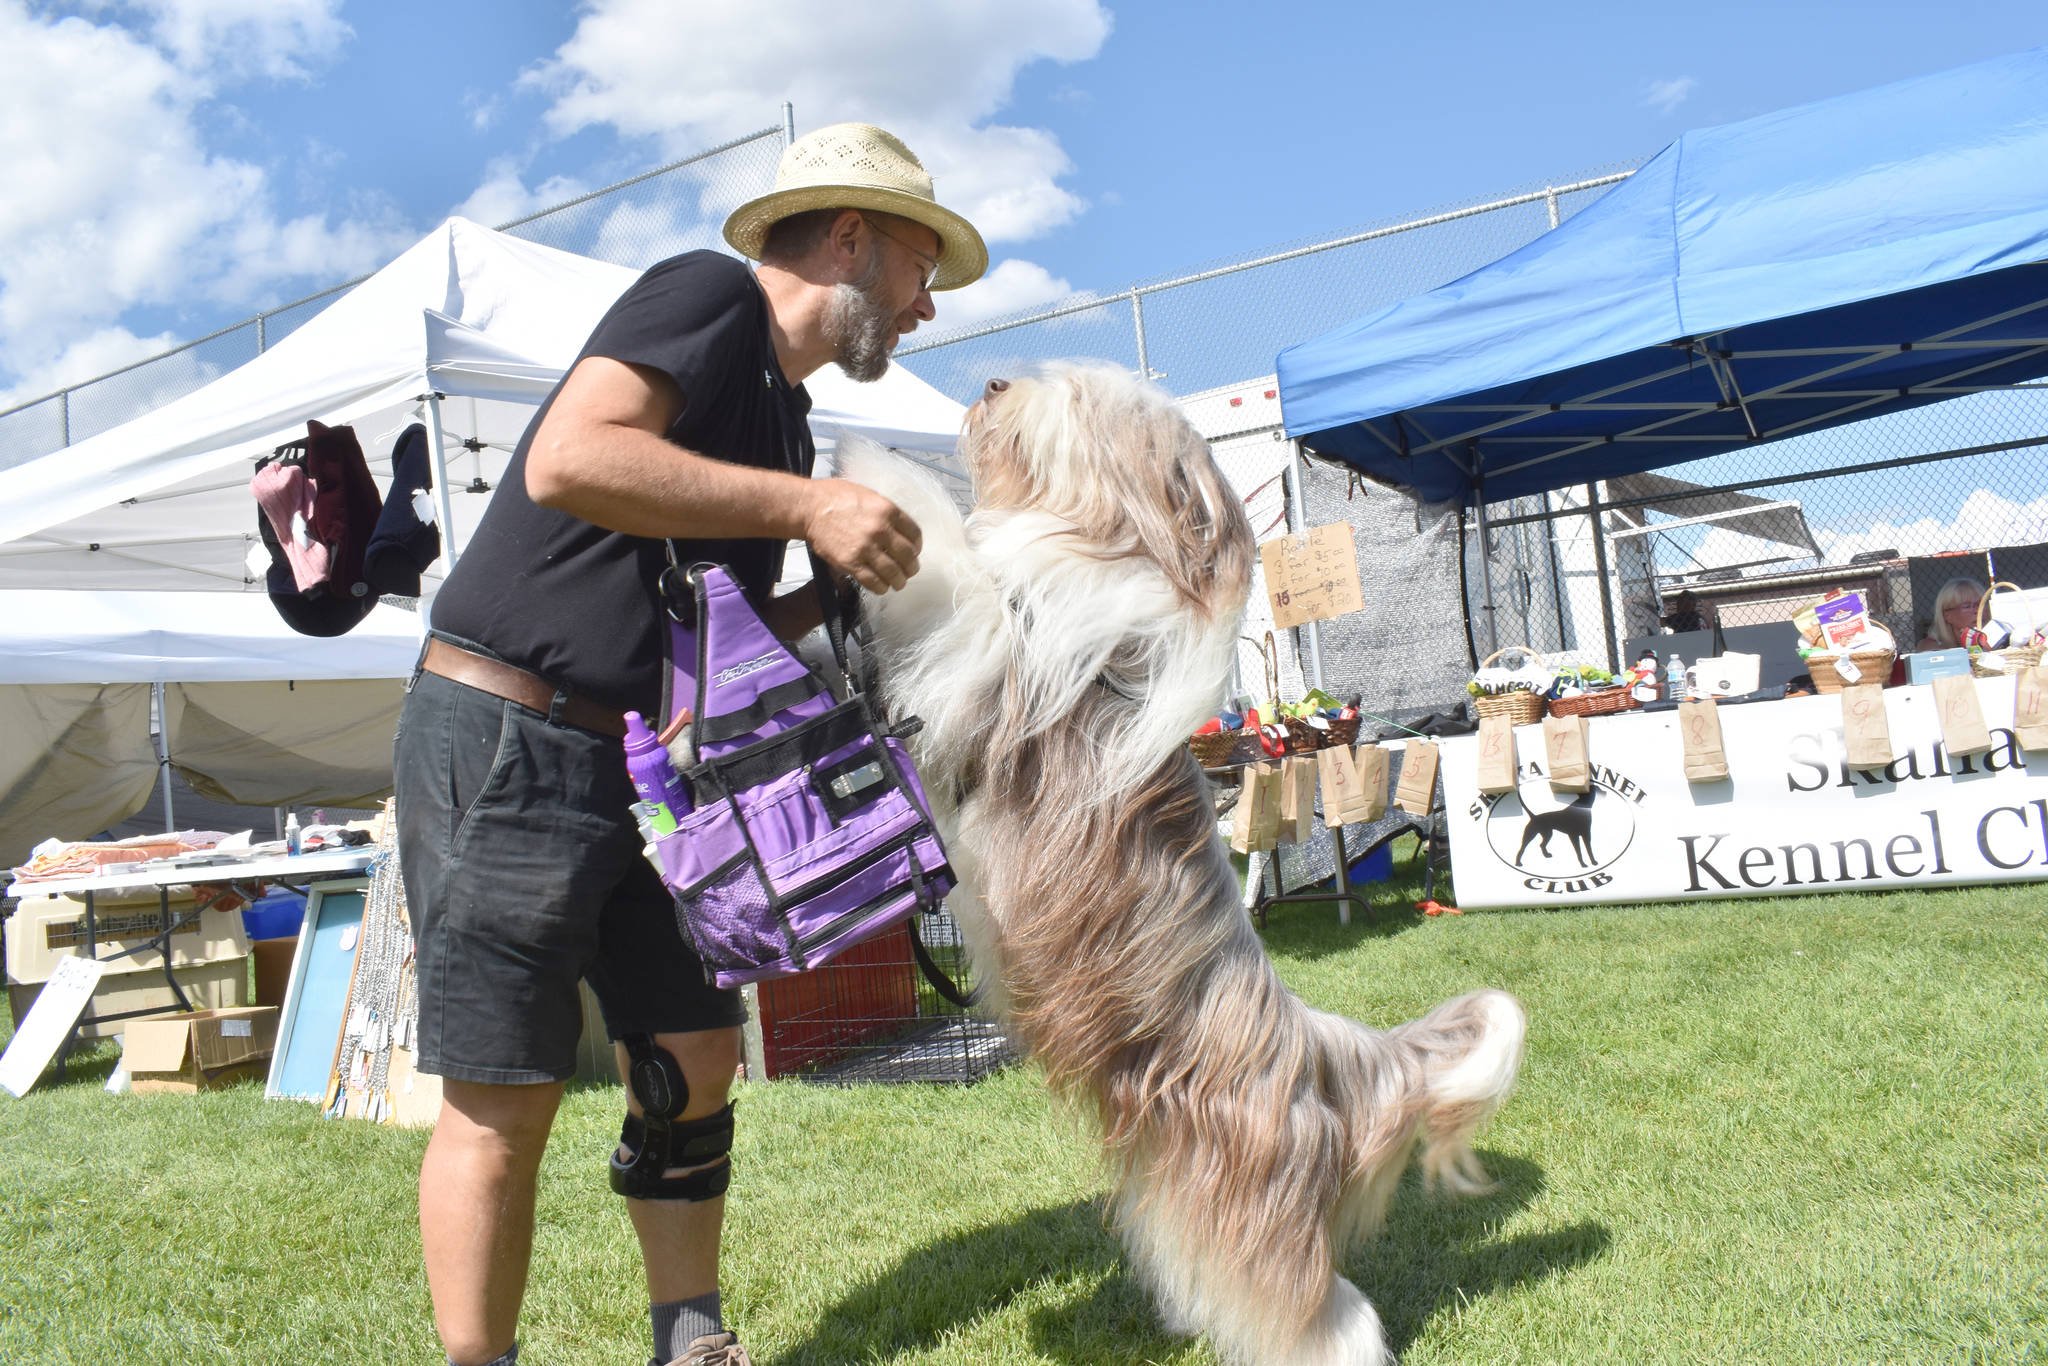 James Young of Naramata and his bearded collie Loki have some fun at the Skaha Kennel Club dog show in Summerland in 2019. The municipality of Summerland has approved a temporary dog park at the Dale Meadows Sports Complex. (Black Press file photo)